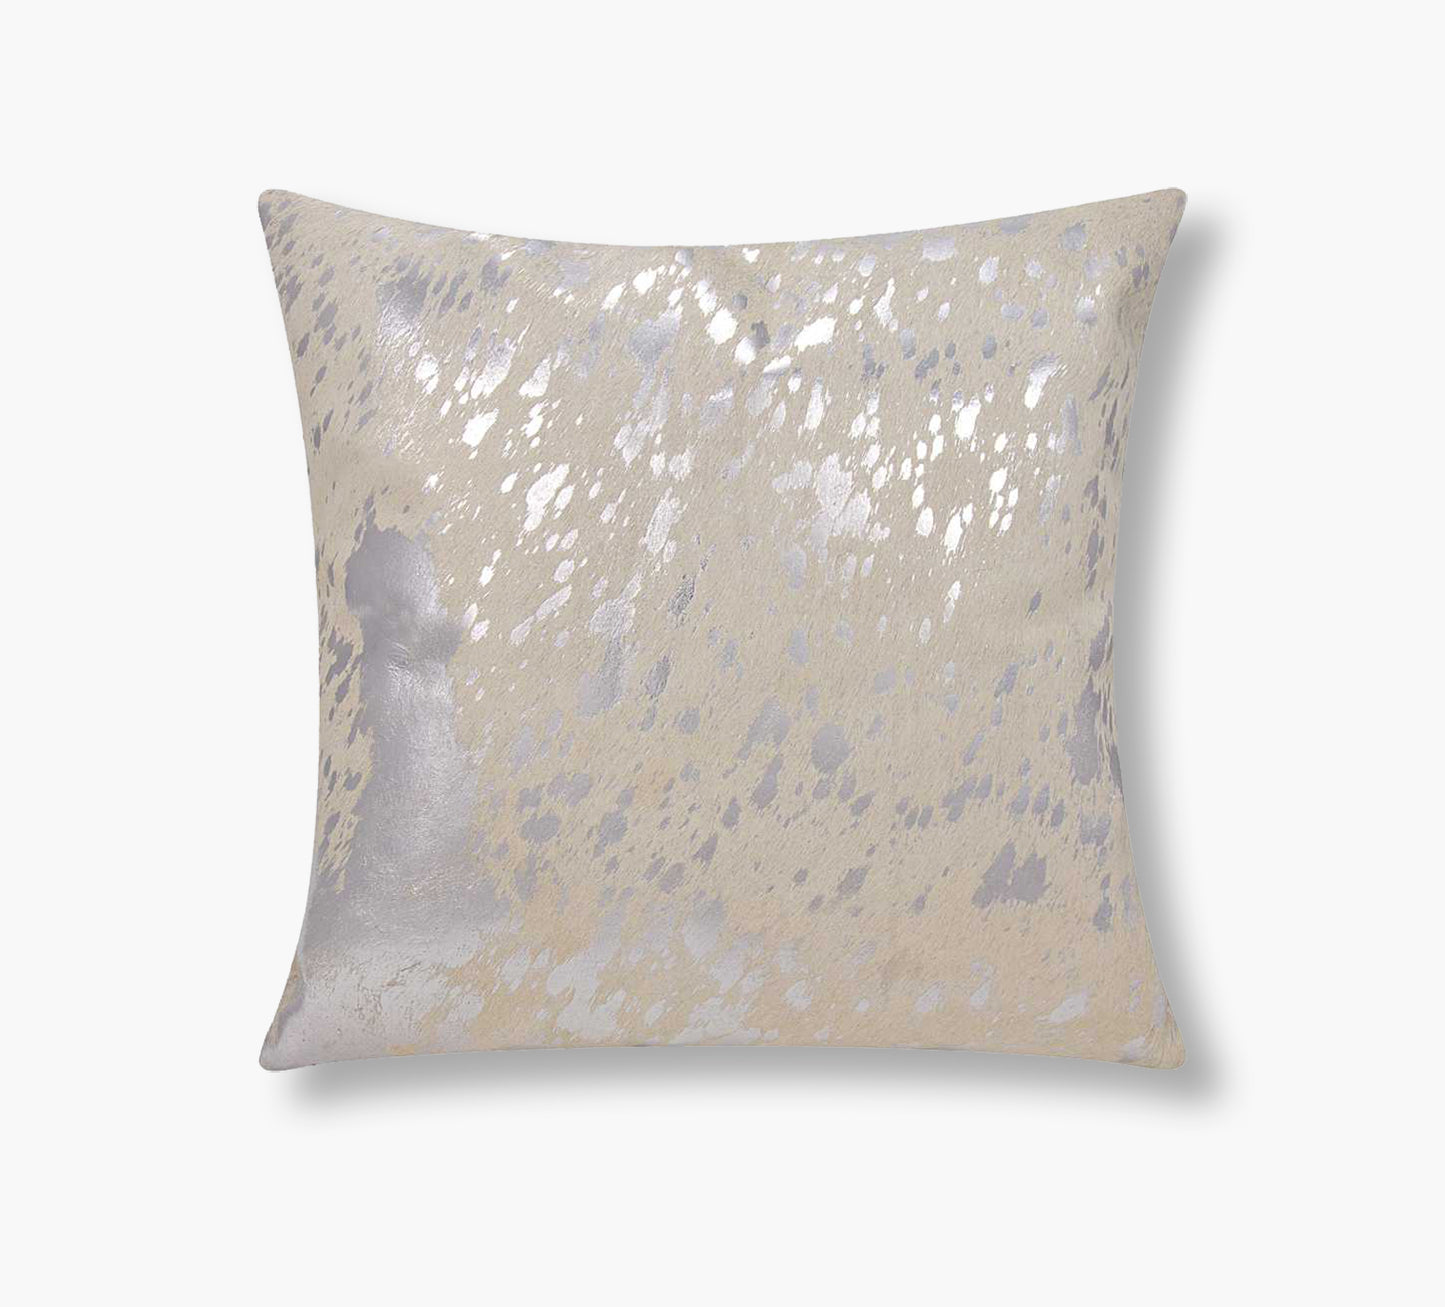 Natural Leather Hide Grey Silver pillow 18 x 18